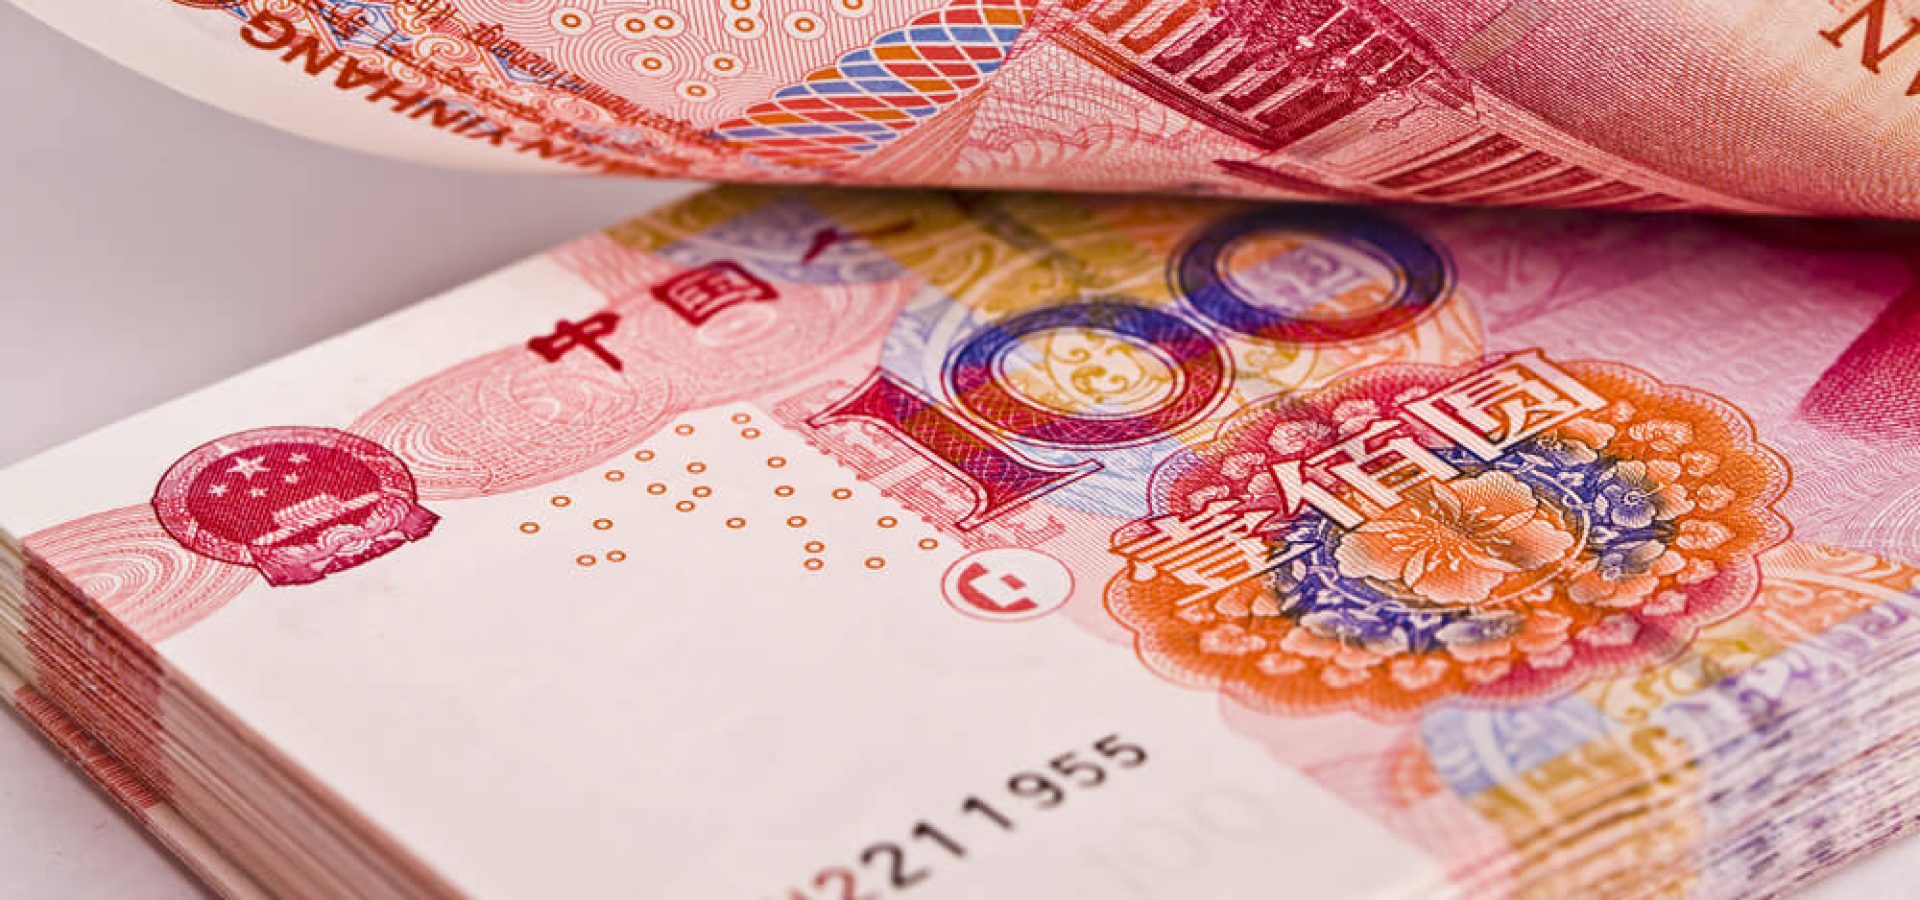 Wibest – USD to CNY: A stack of 100-yuan bills.